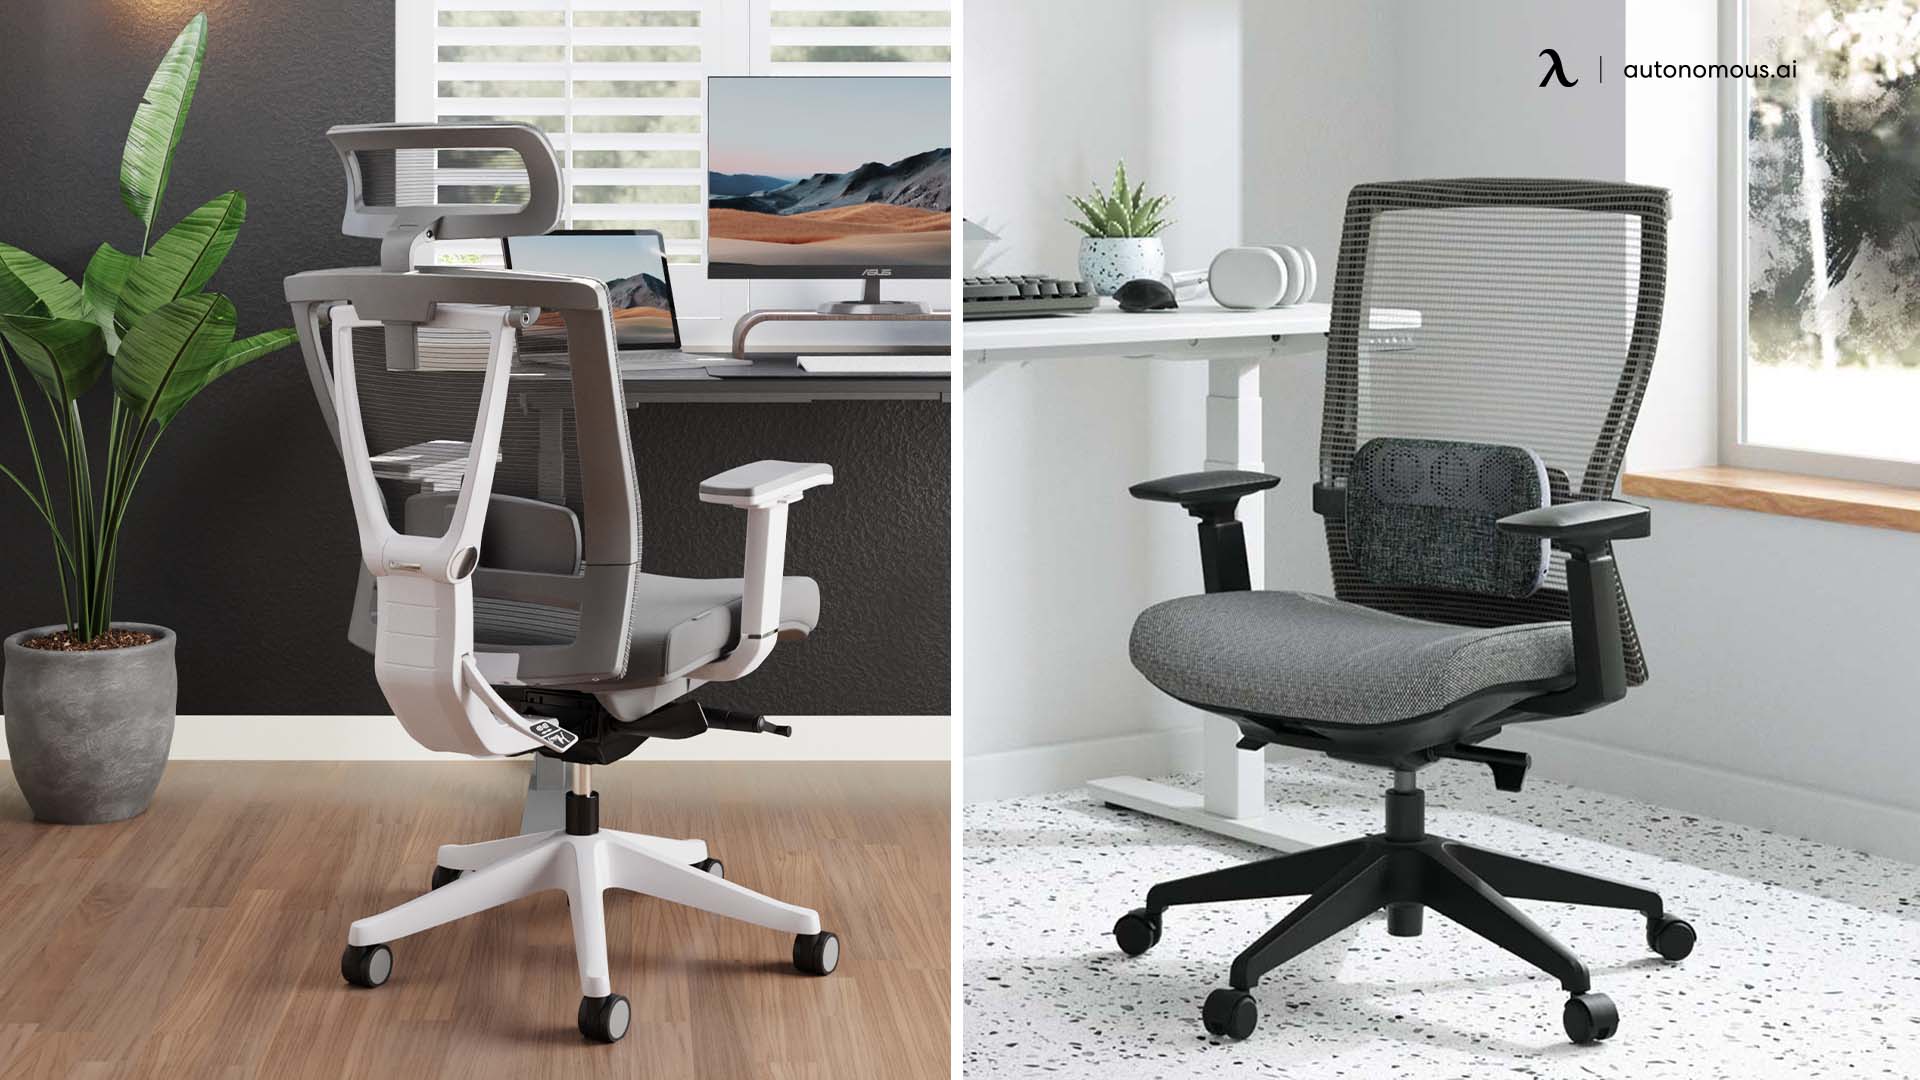 Lumbar Support Chairs Versus Removable Lumbar Support